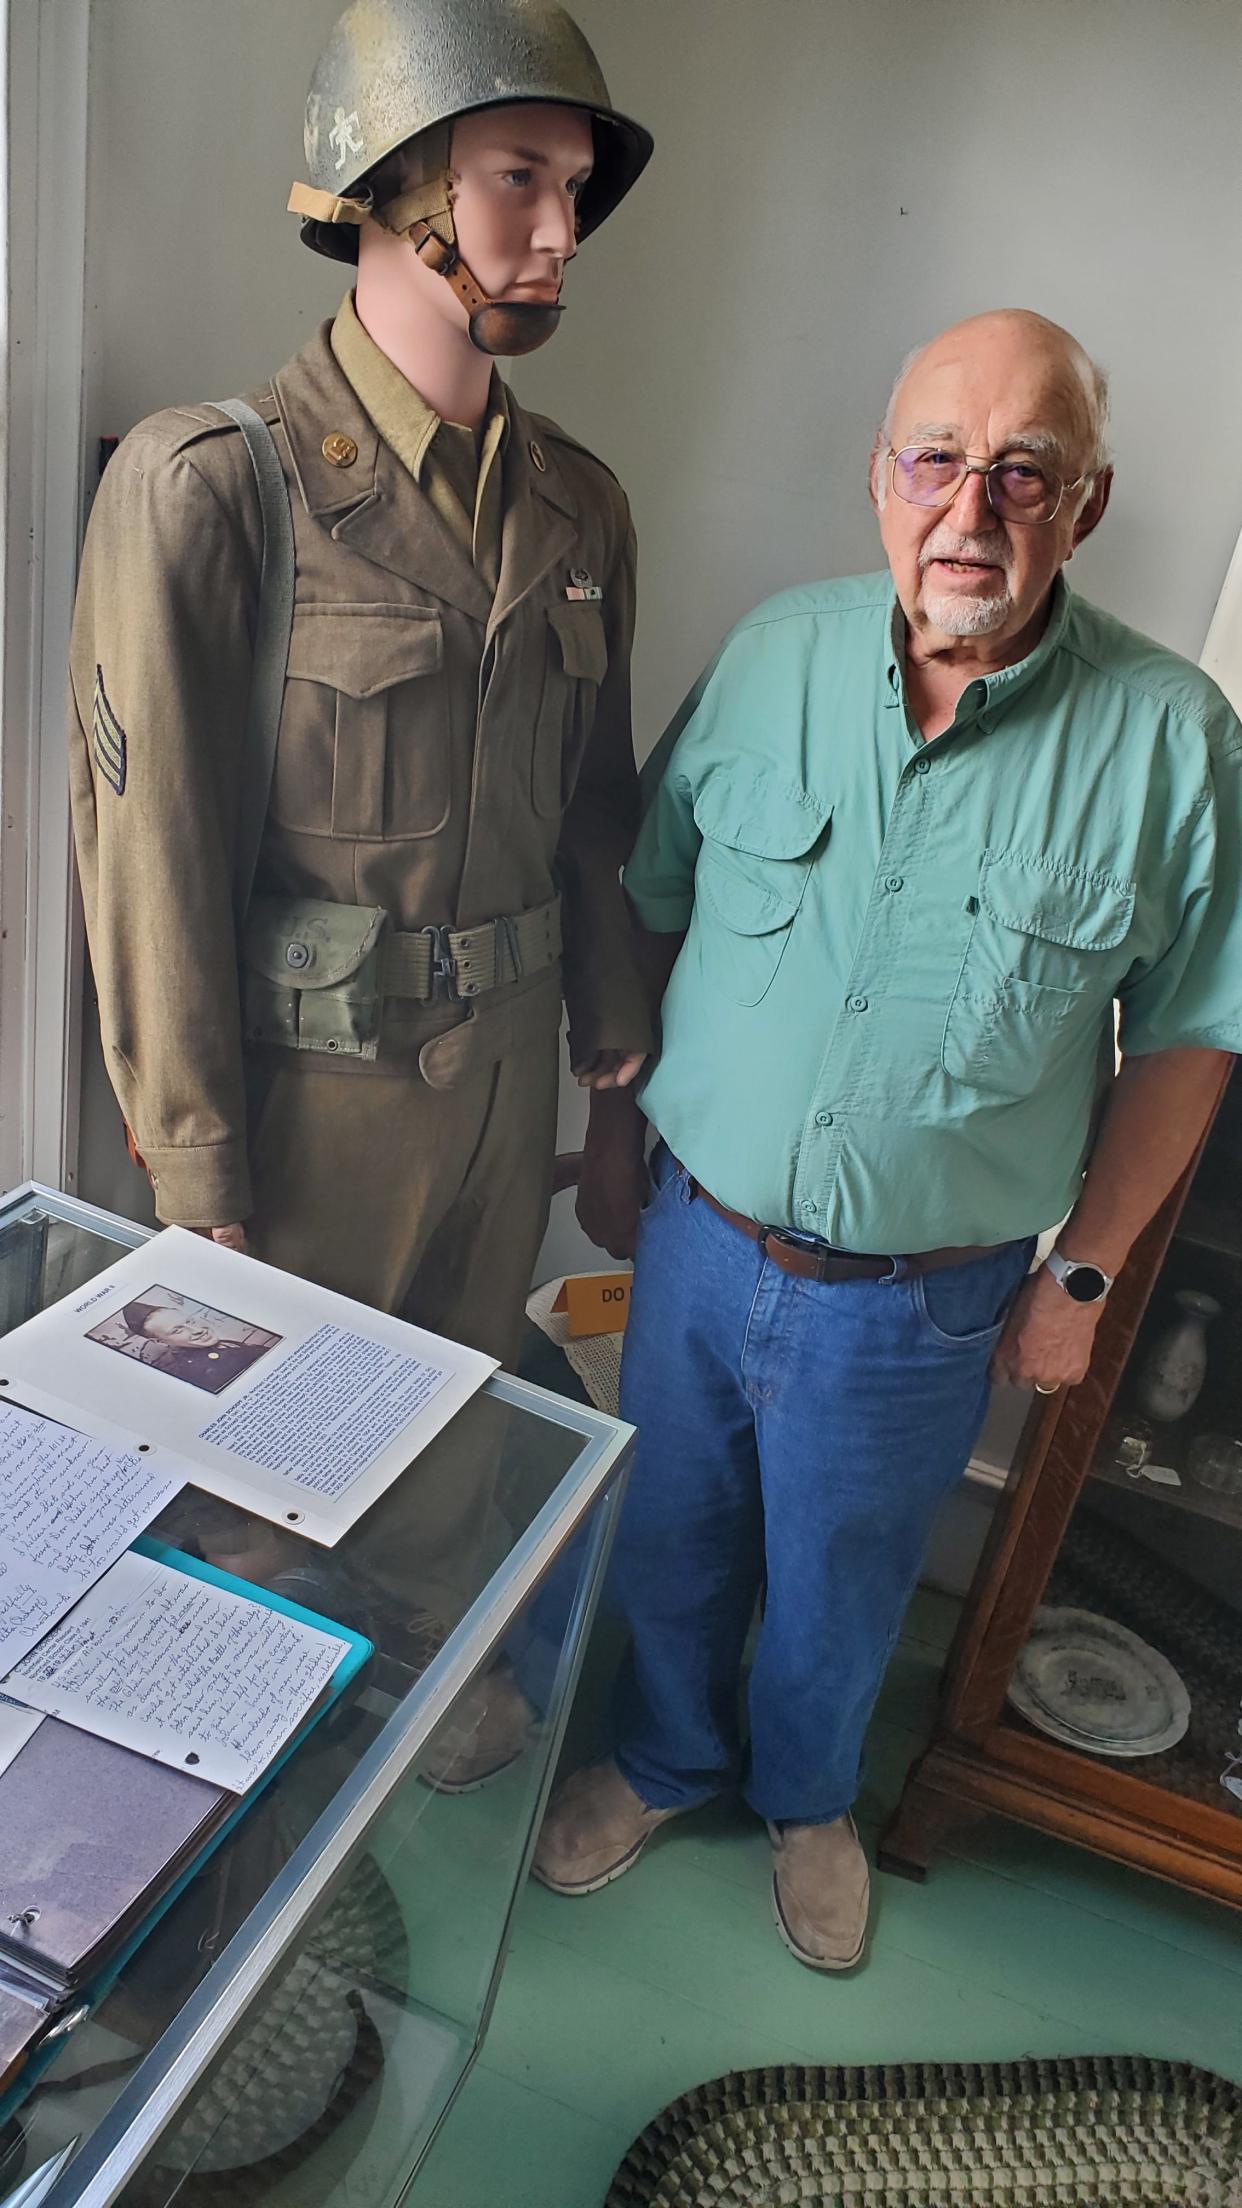 Rick Devine, a trustee of the Historical Society of Olde Northfield, stands next to a mannequin dressed with the uniform of Charles J. Schoepf, a Northfield veteran of World War II.